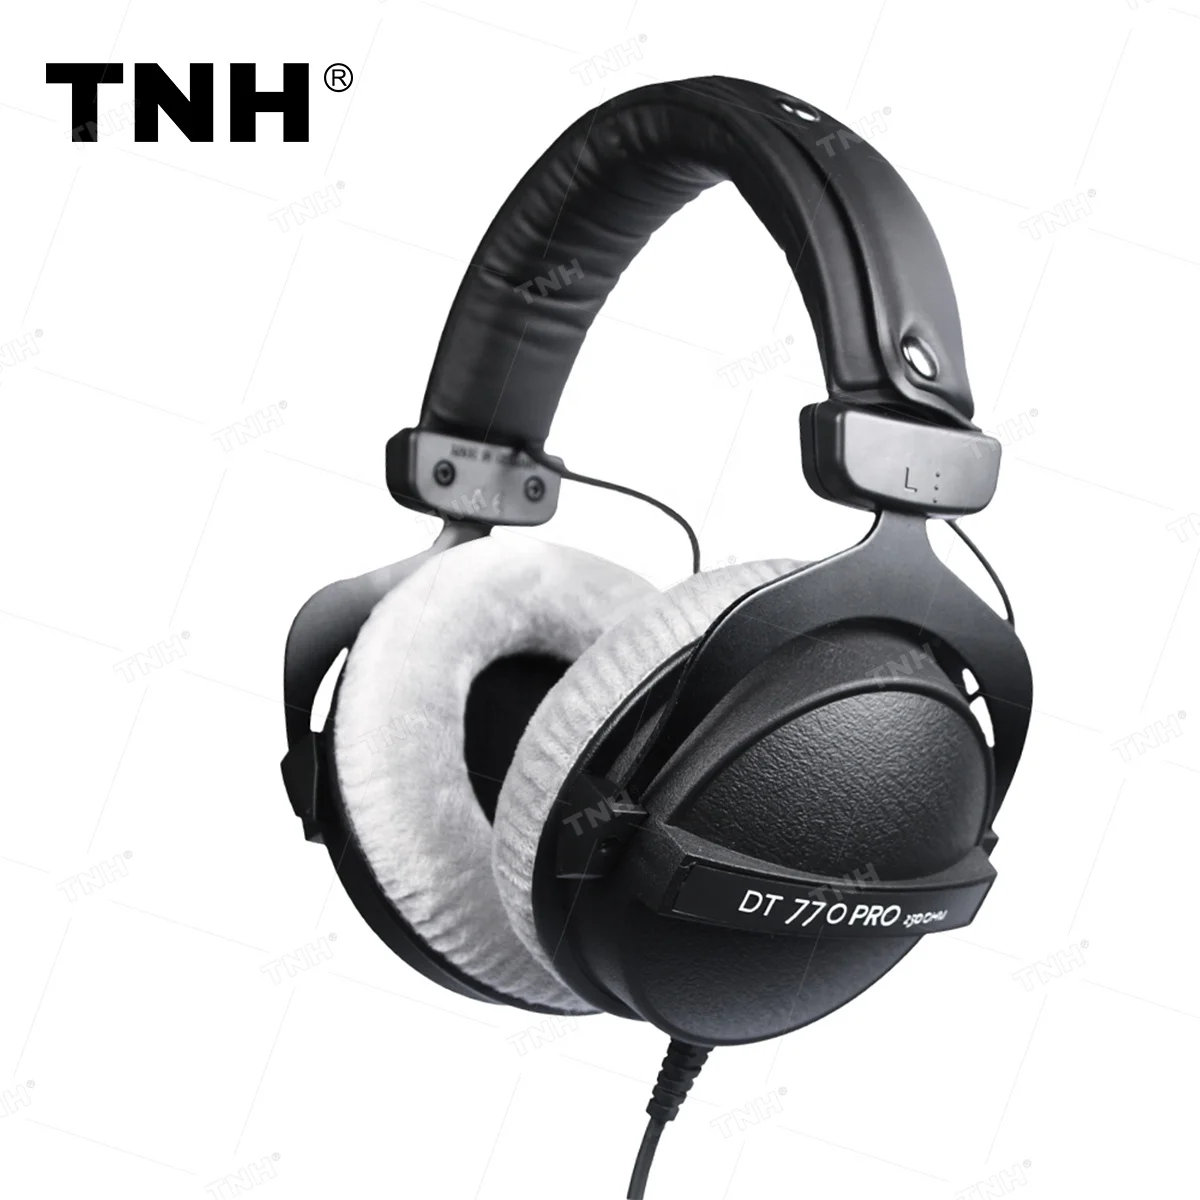 

DT770 Professional Monitor Headphone Wired Stereo Headphones Recording Studio Equipment for Travel Computer Mixer DJ